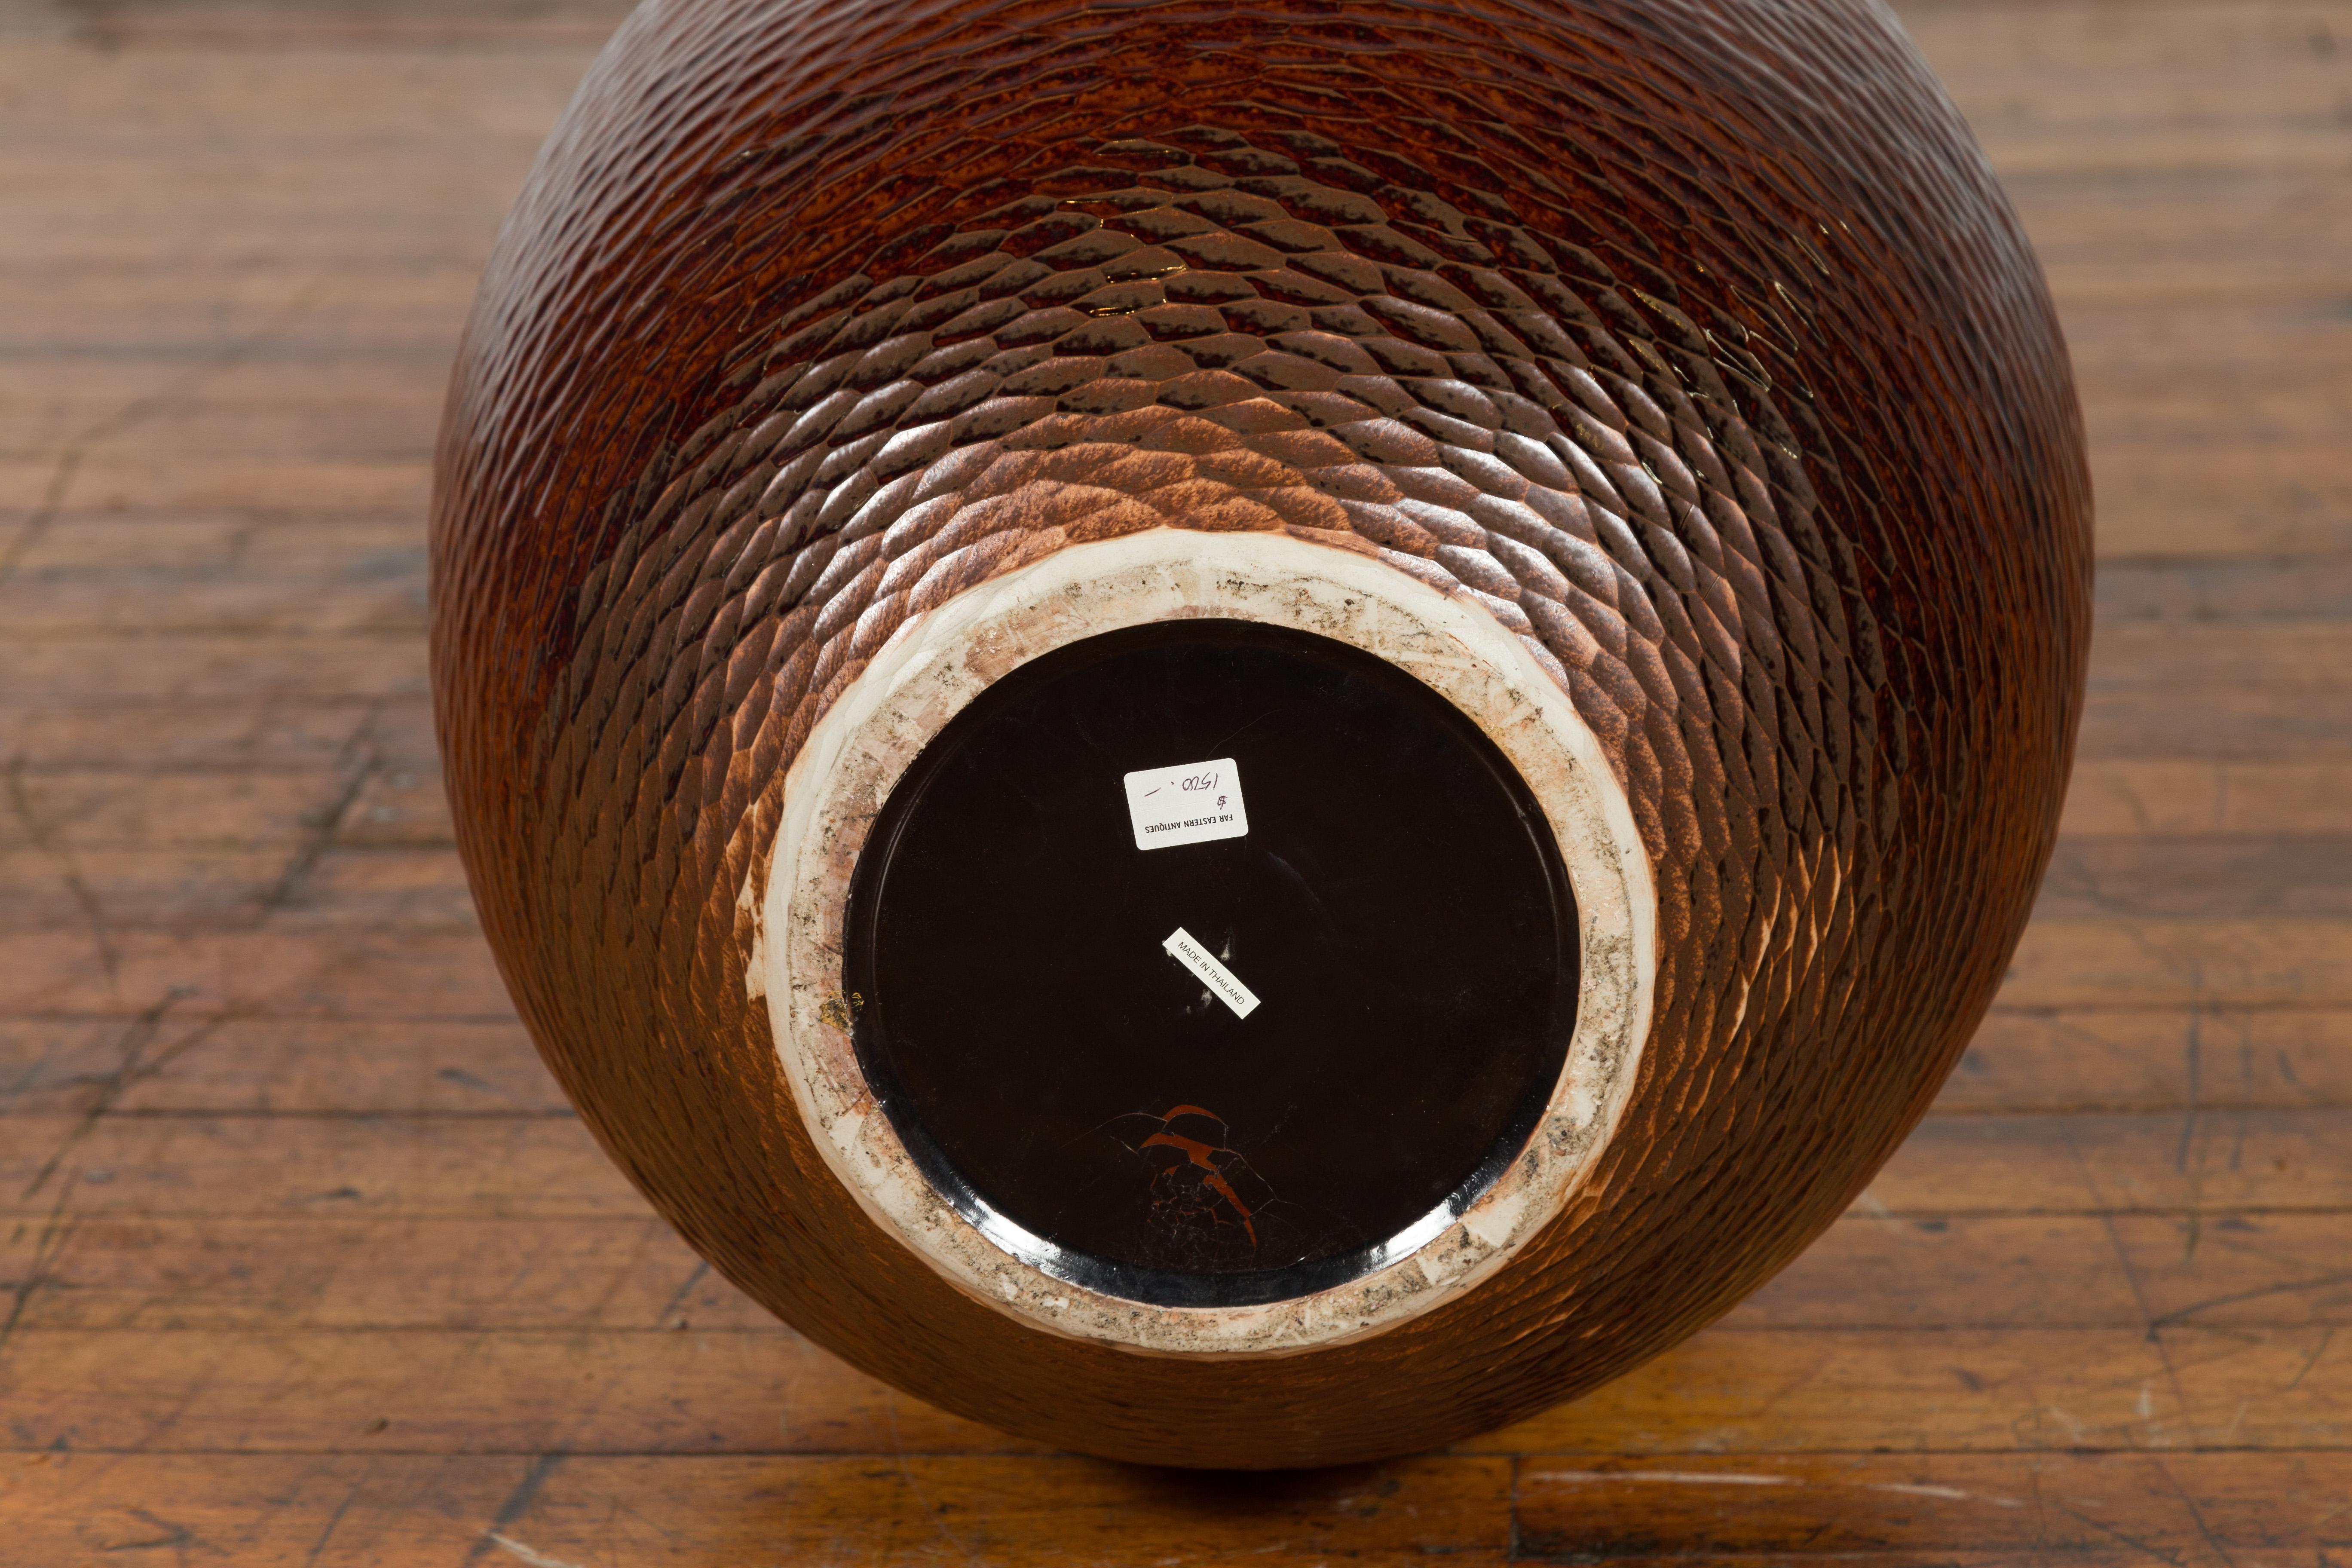 Thai Chiang Mai Brown Textured Teardrop Shaped Vase from the Prem Collection For Sale 5